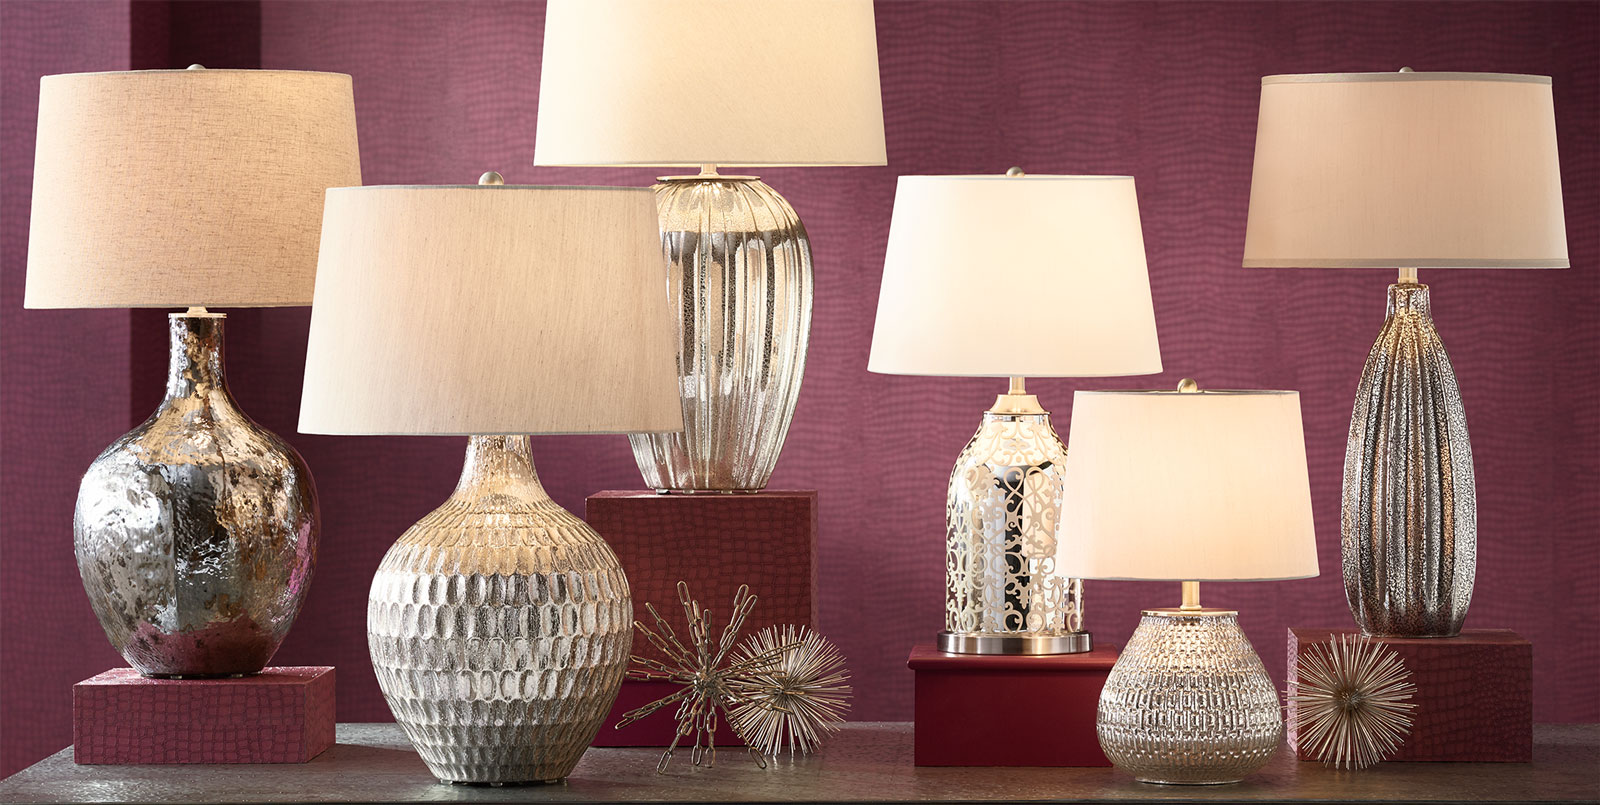 How To Select The Perfect Table Lamp, How High Should A Reading Lamp Be